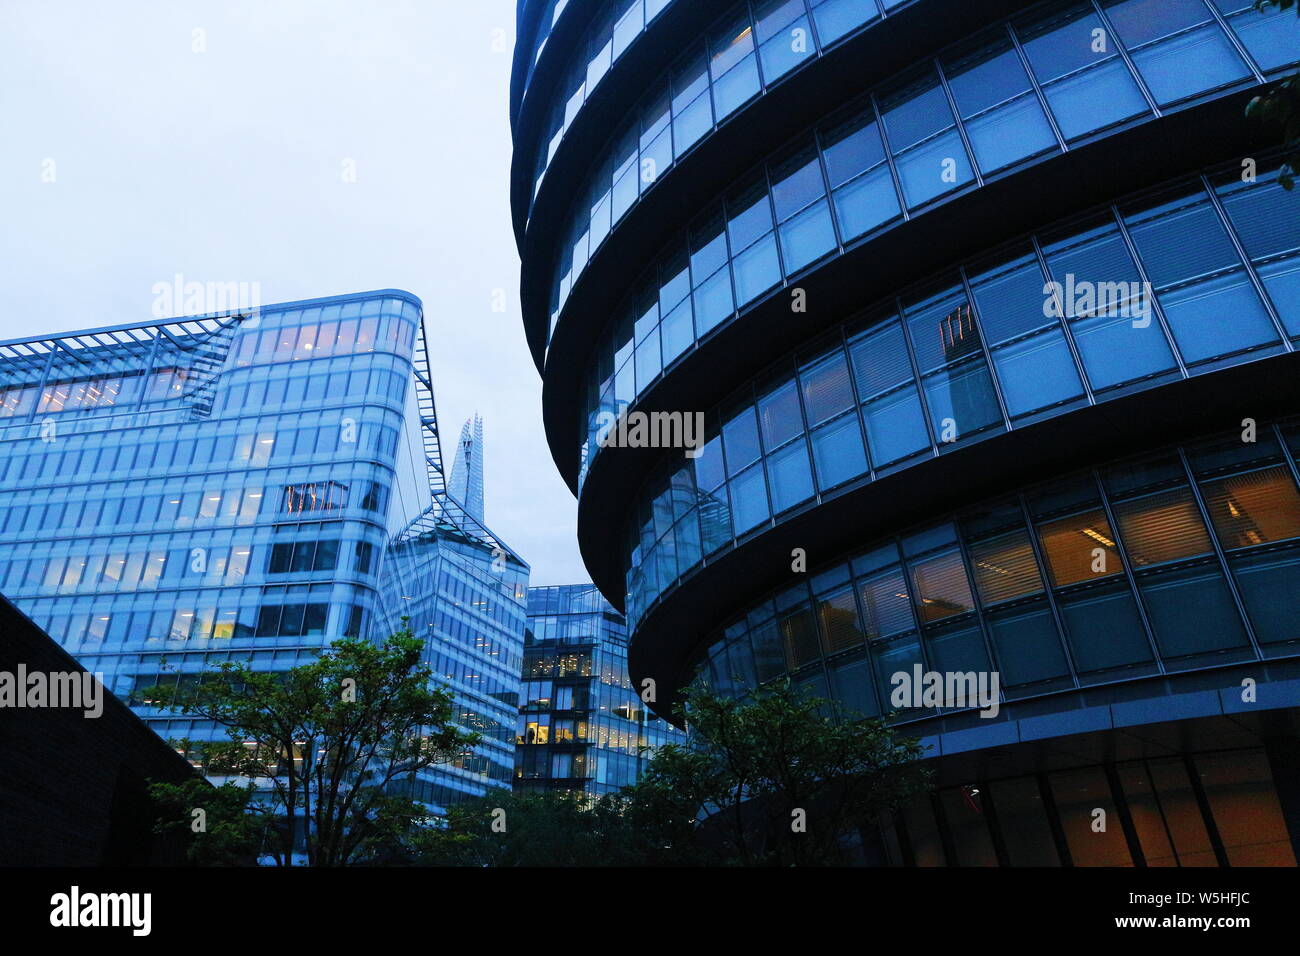 A building in London, UK in a bluish colour and lots of windows shot in an low-angle perspective. The photo was taken at night and on a cloudy day. Stock Photo